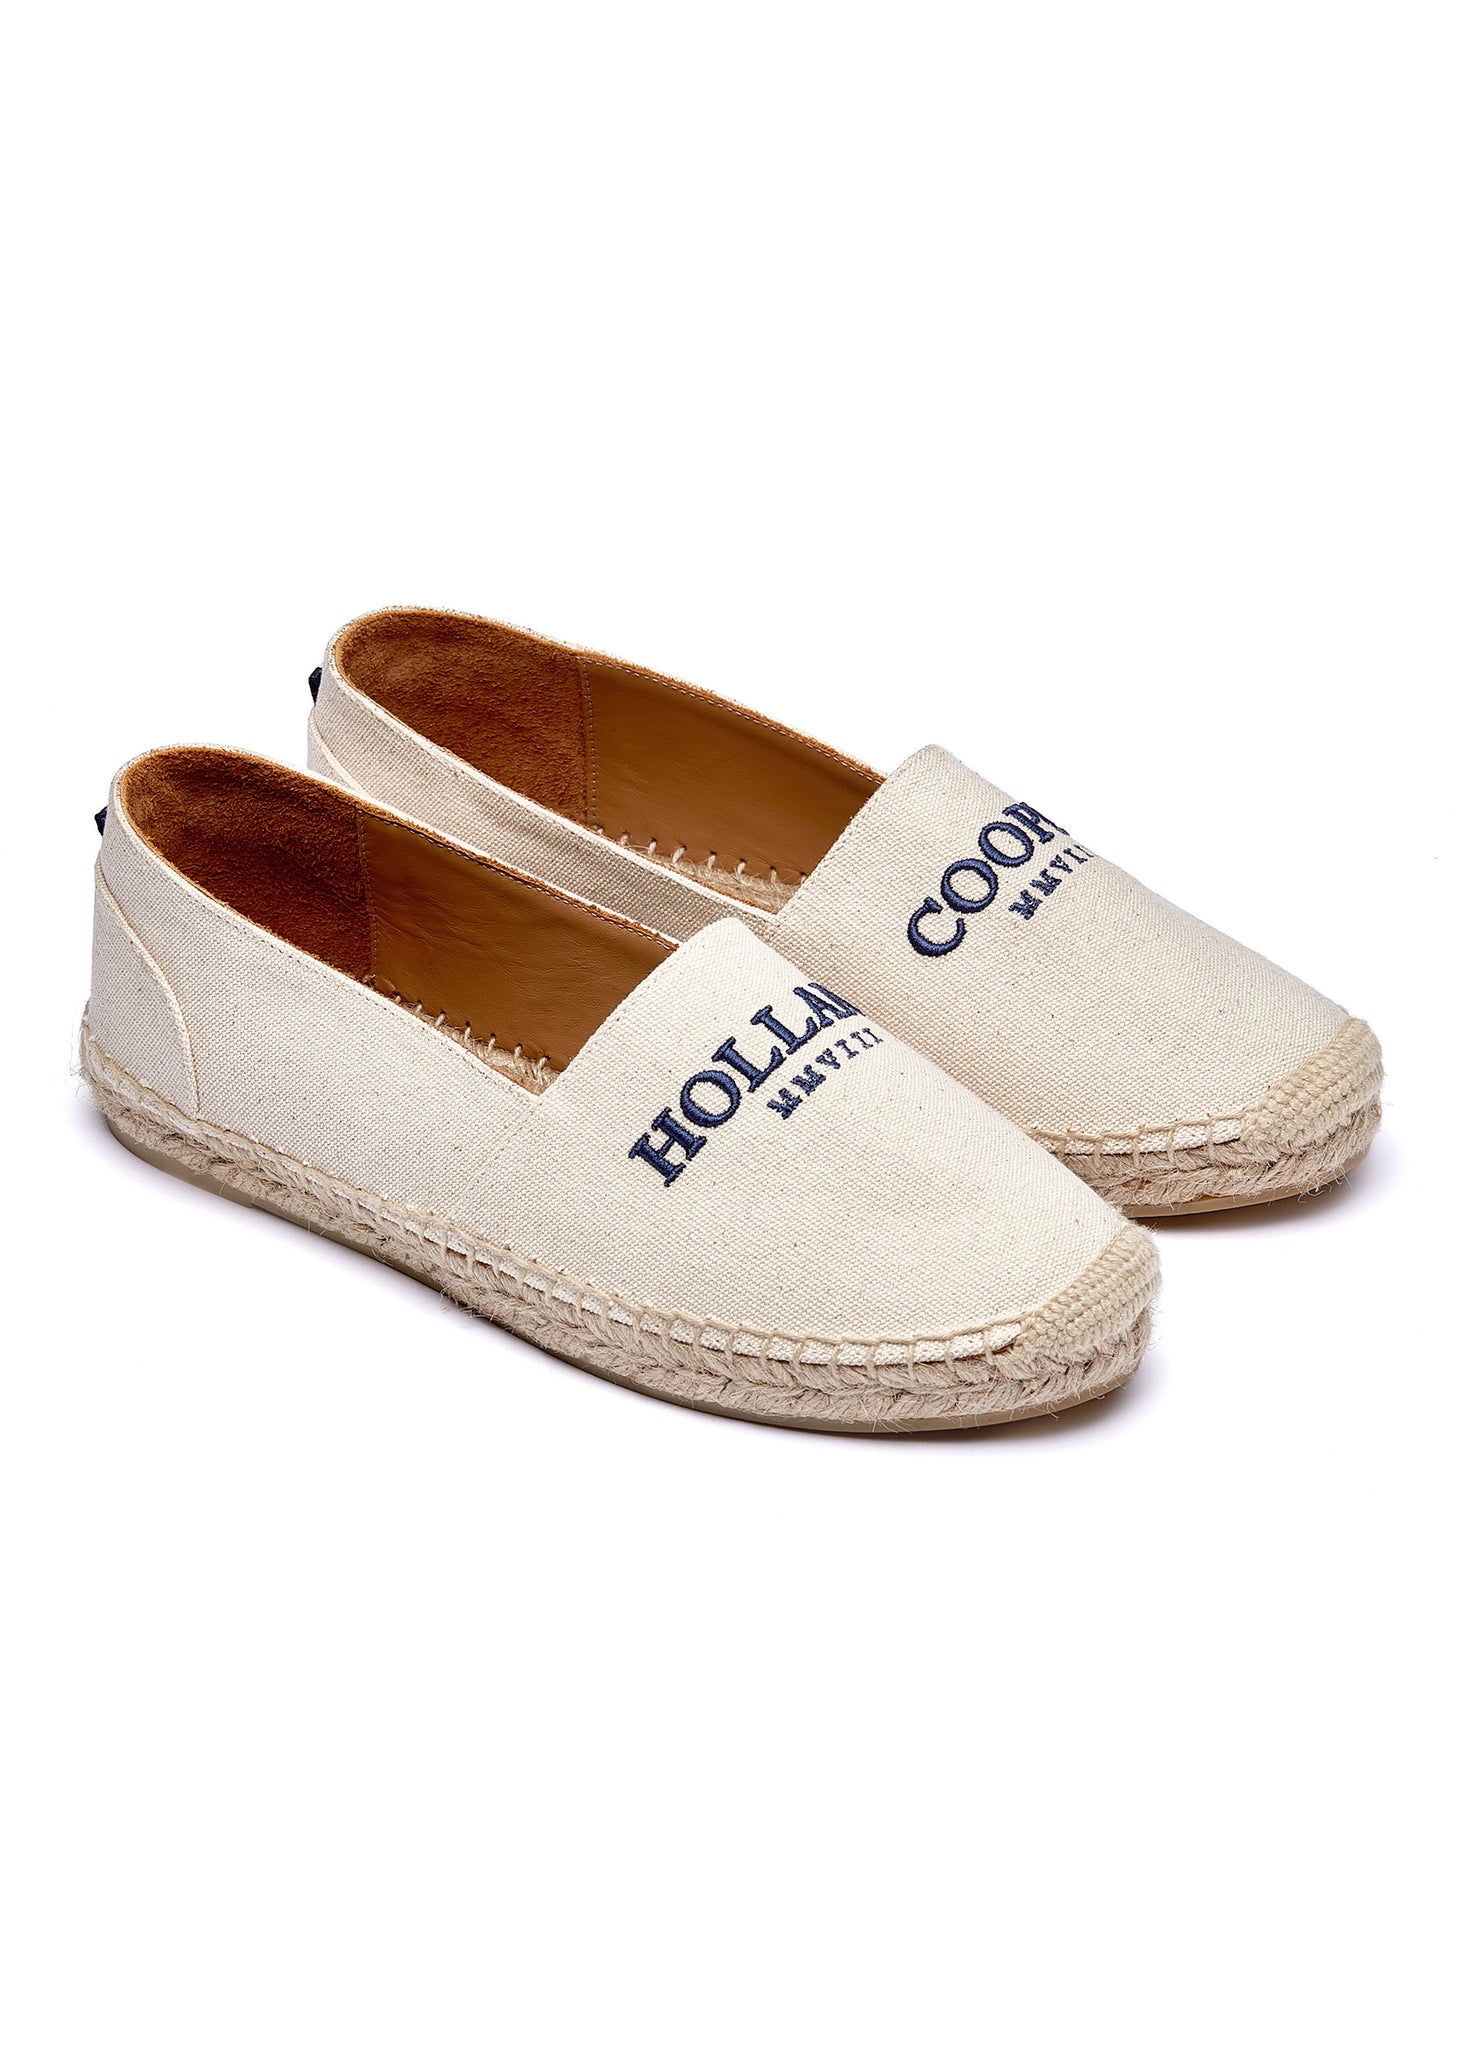 classic style natural canvas espadrille with plaited jute sole and jute toe cap with navy embroidered branding on top